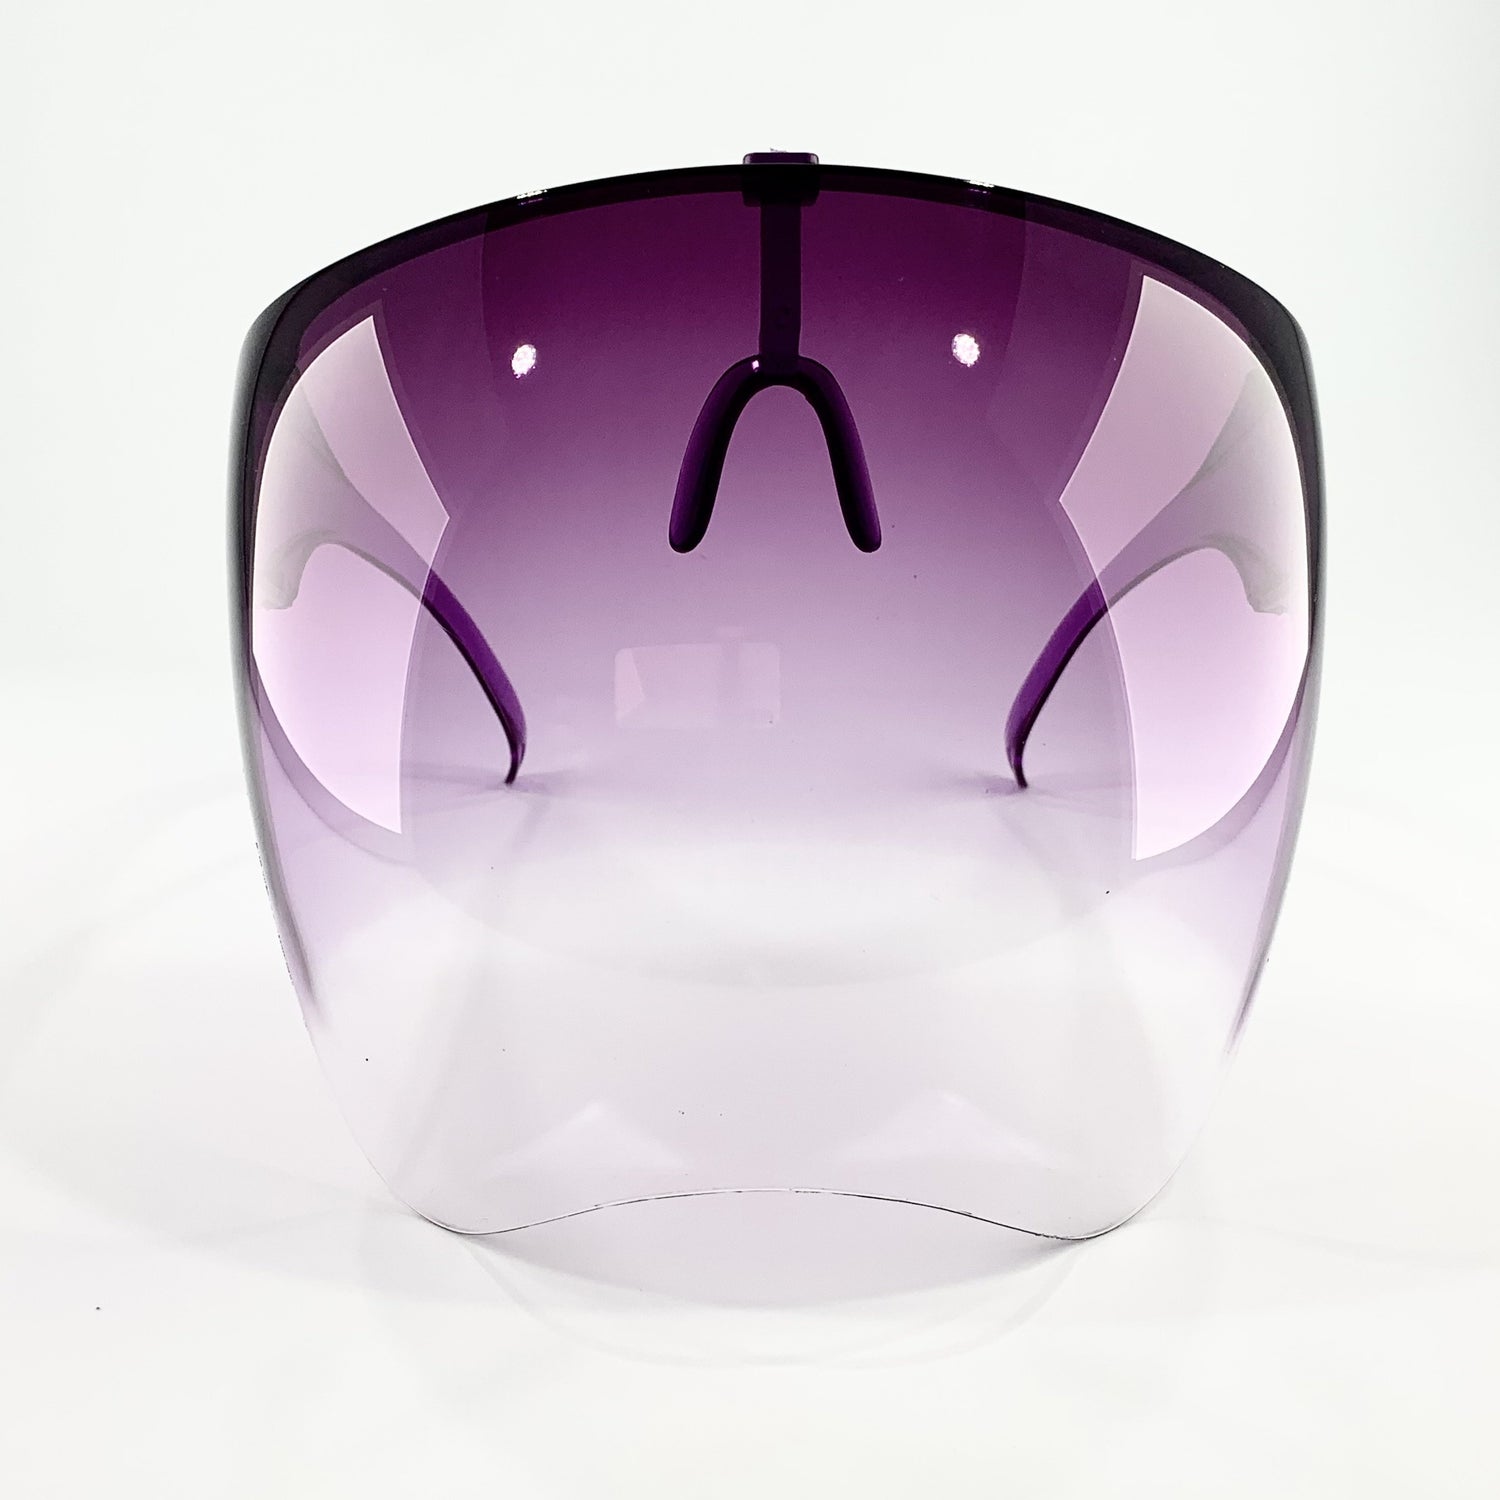 Safety Glasses X Face Shield - Adult Size